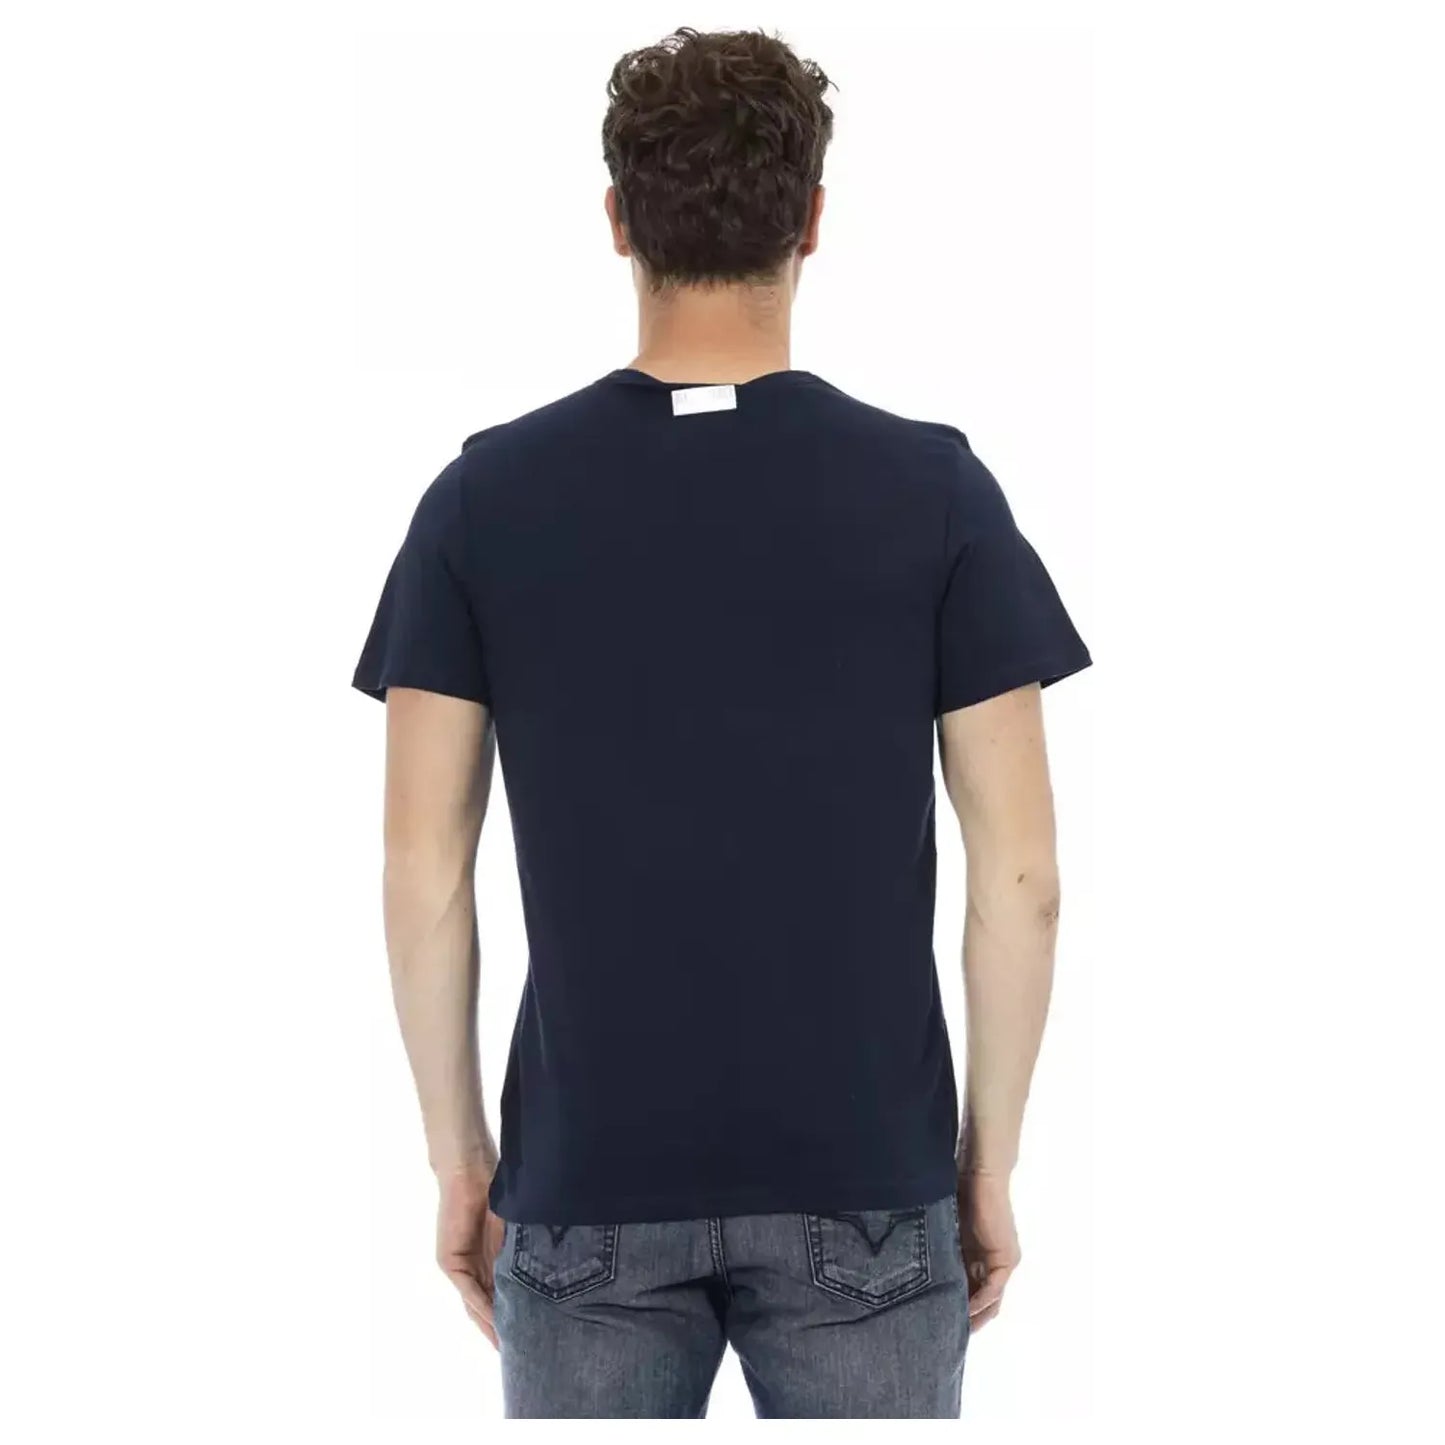 Bikkembergs Army Print Logo Tee in Pure Cotton blue-cotton-t-shirt-5 product-22050-1334198911-24-c26861ca-cd7.webp